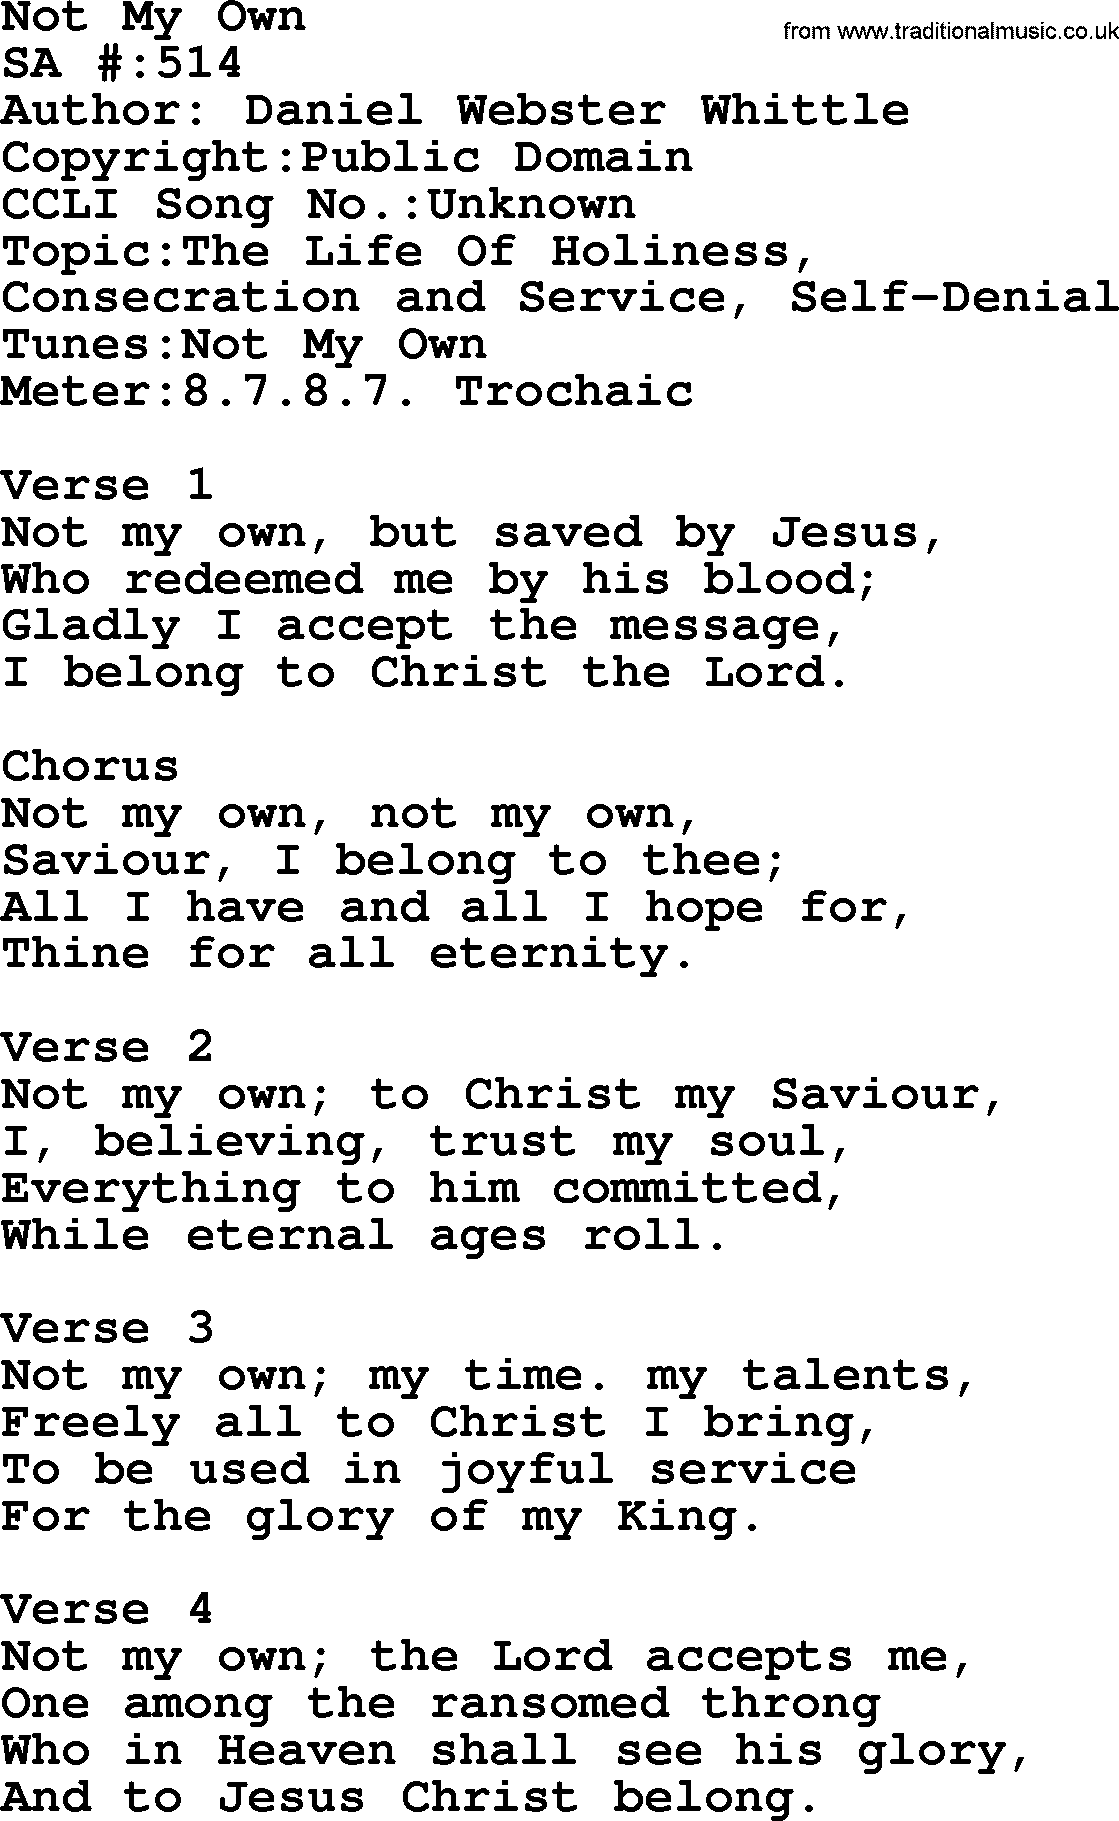 Salvation Army Hymnal, title: Not My Own, with lyrics and PDF,